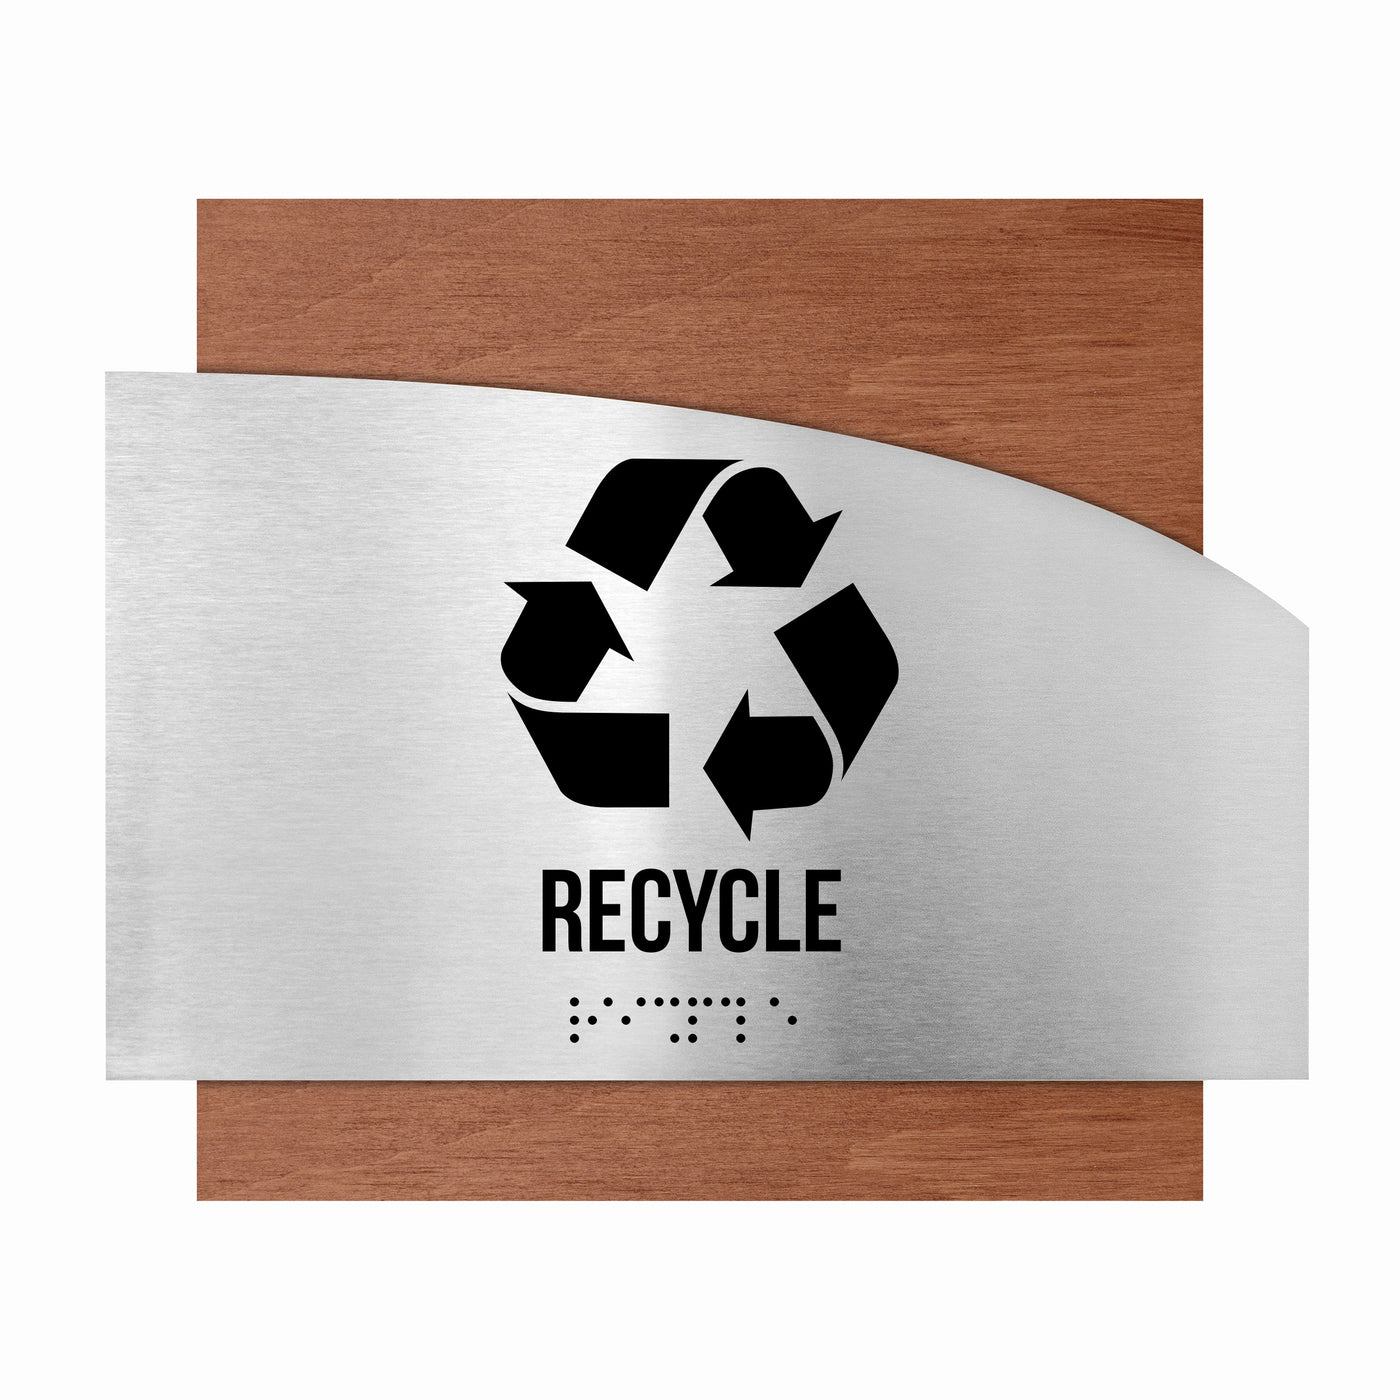 Door Signs - Recycle Signs - Stainless Steel & Wood Plate - "Wave" Design